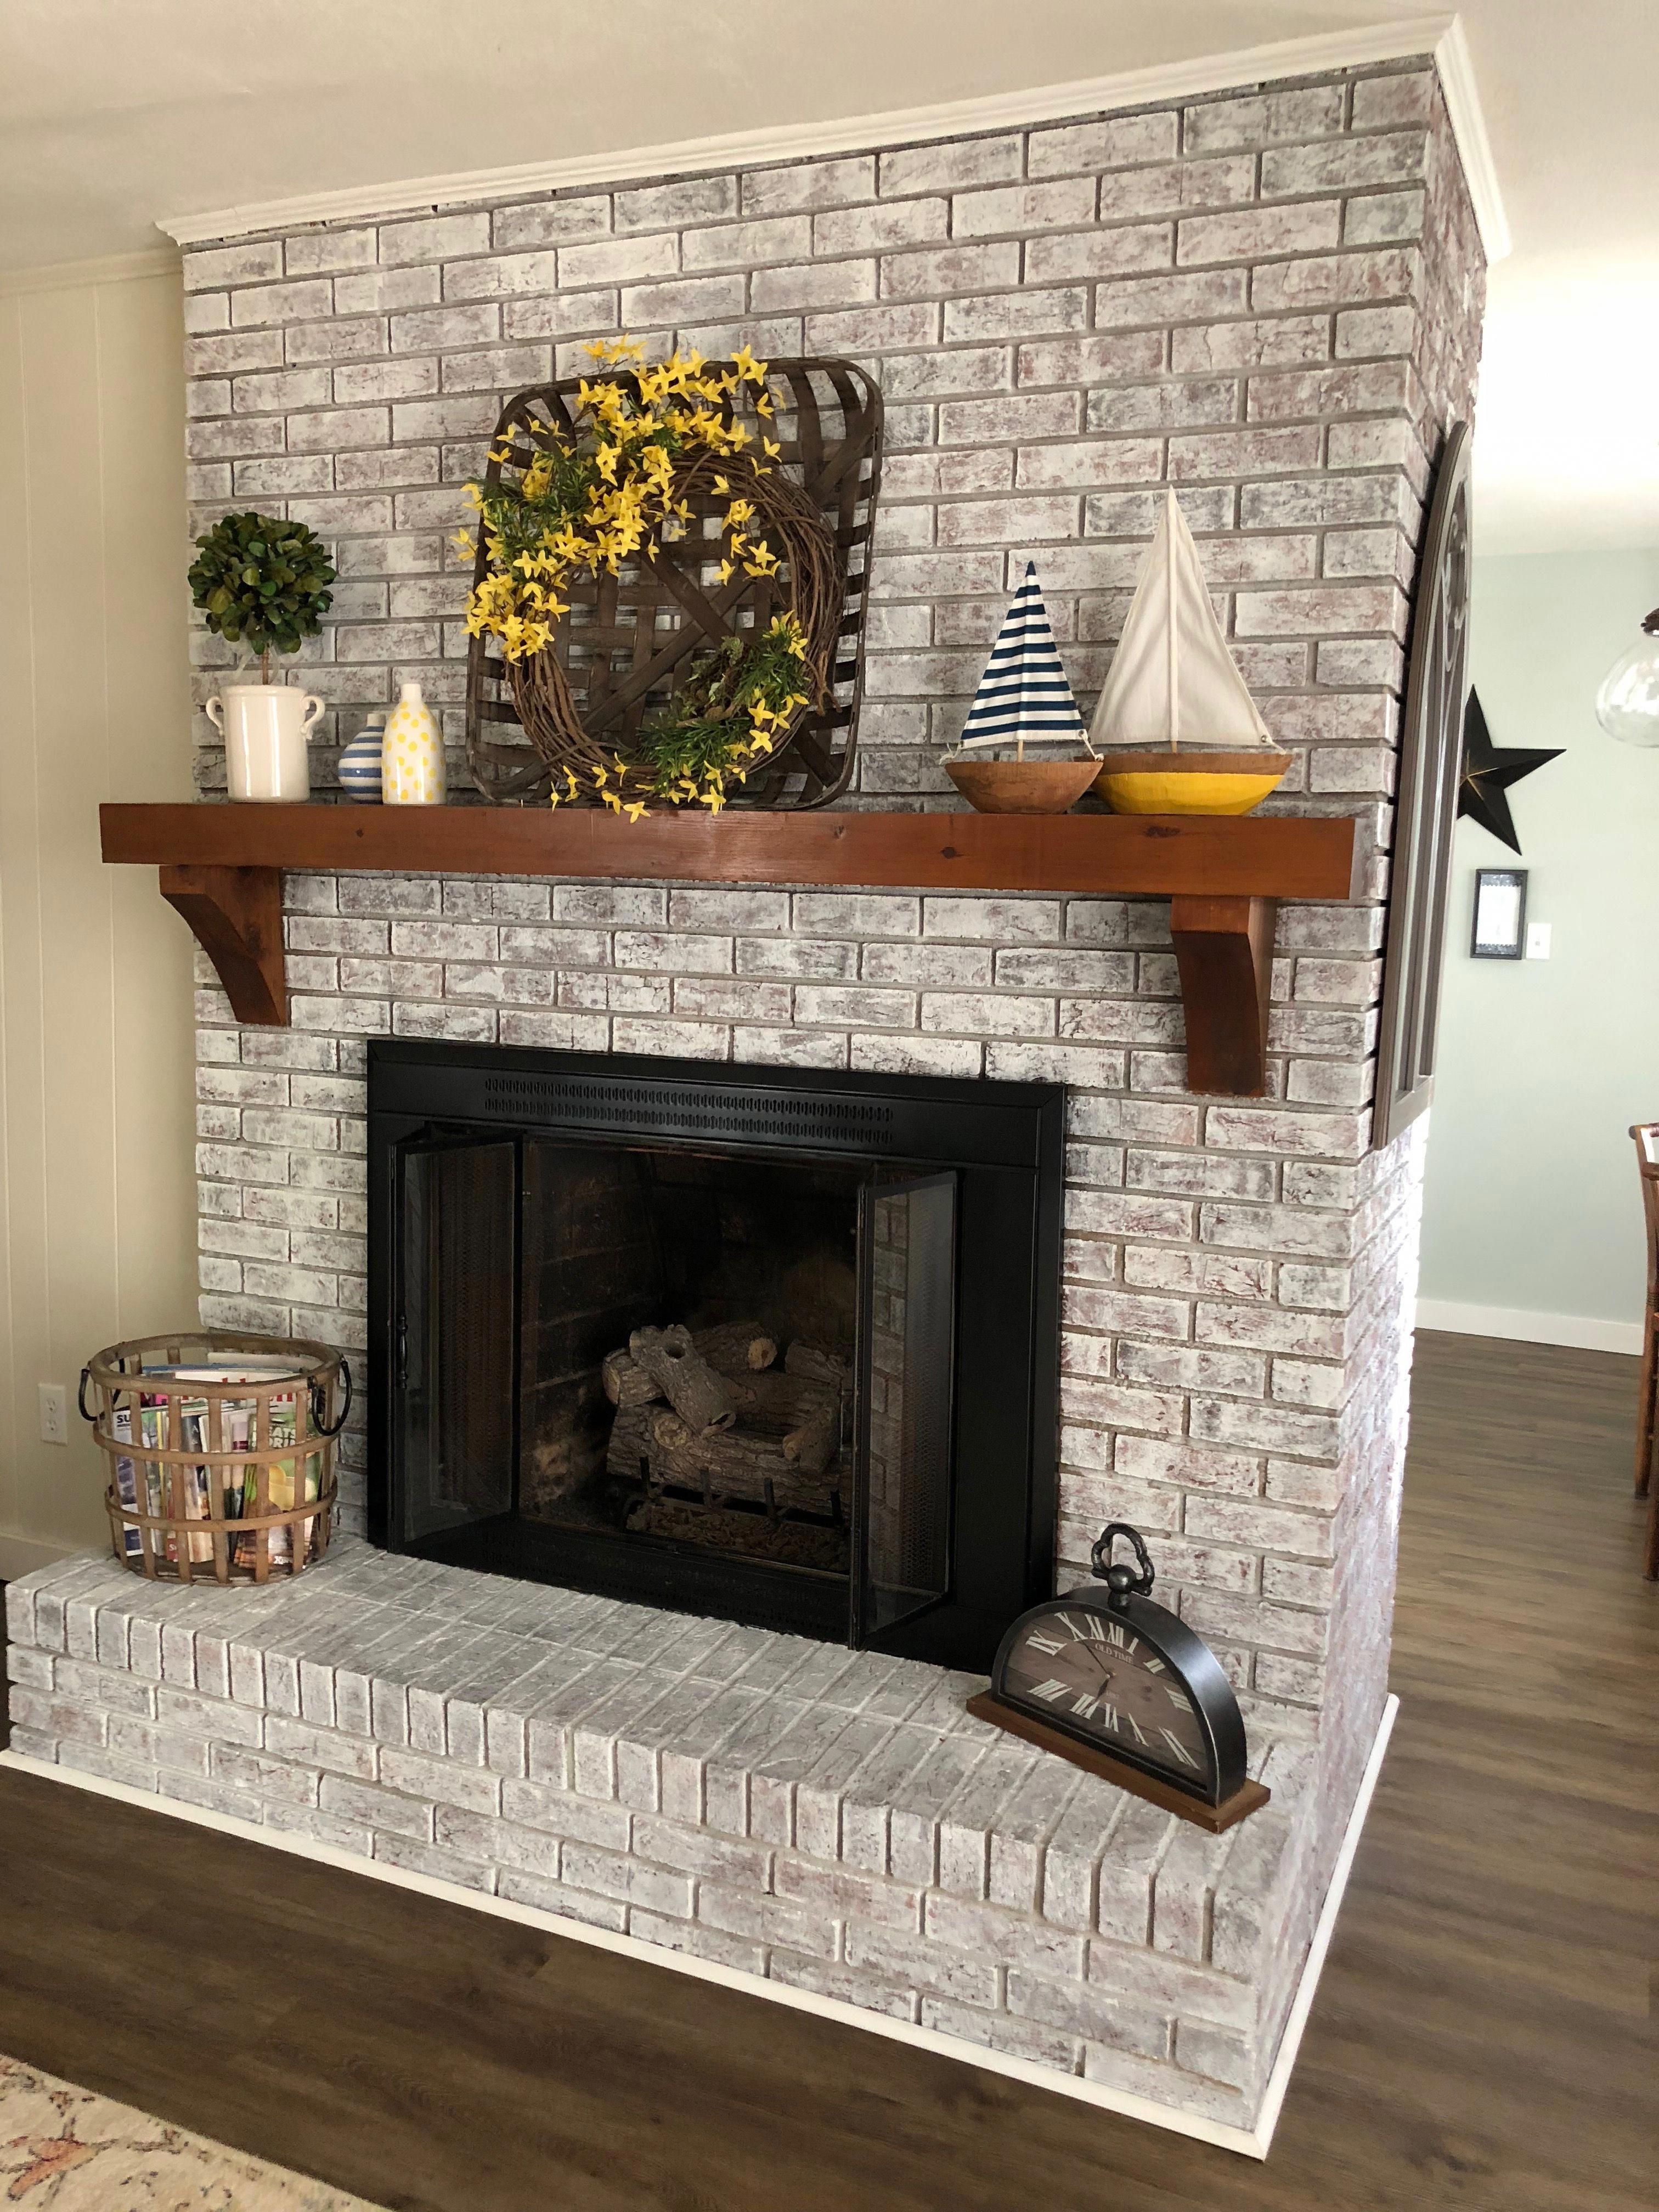 What Color Should I Paint My Brick Fireplace Fresh Painted Brick Fireplace Sw Pure White Over Dark Red Brick